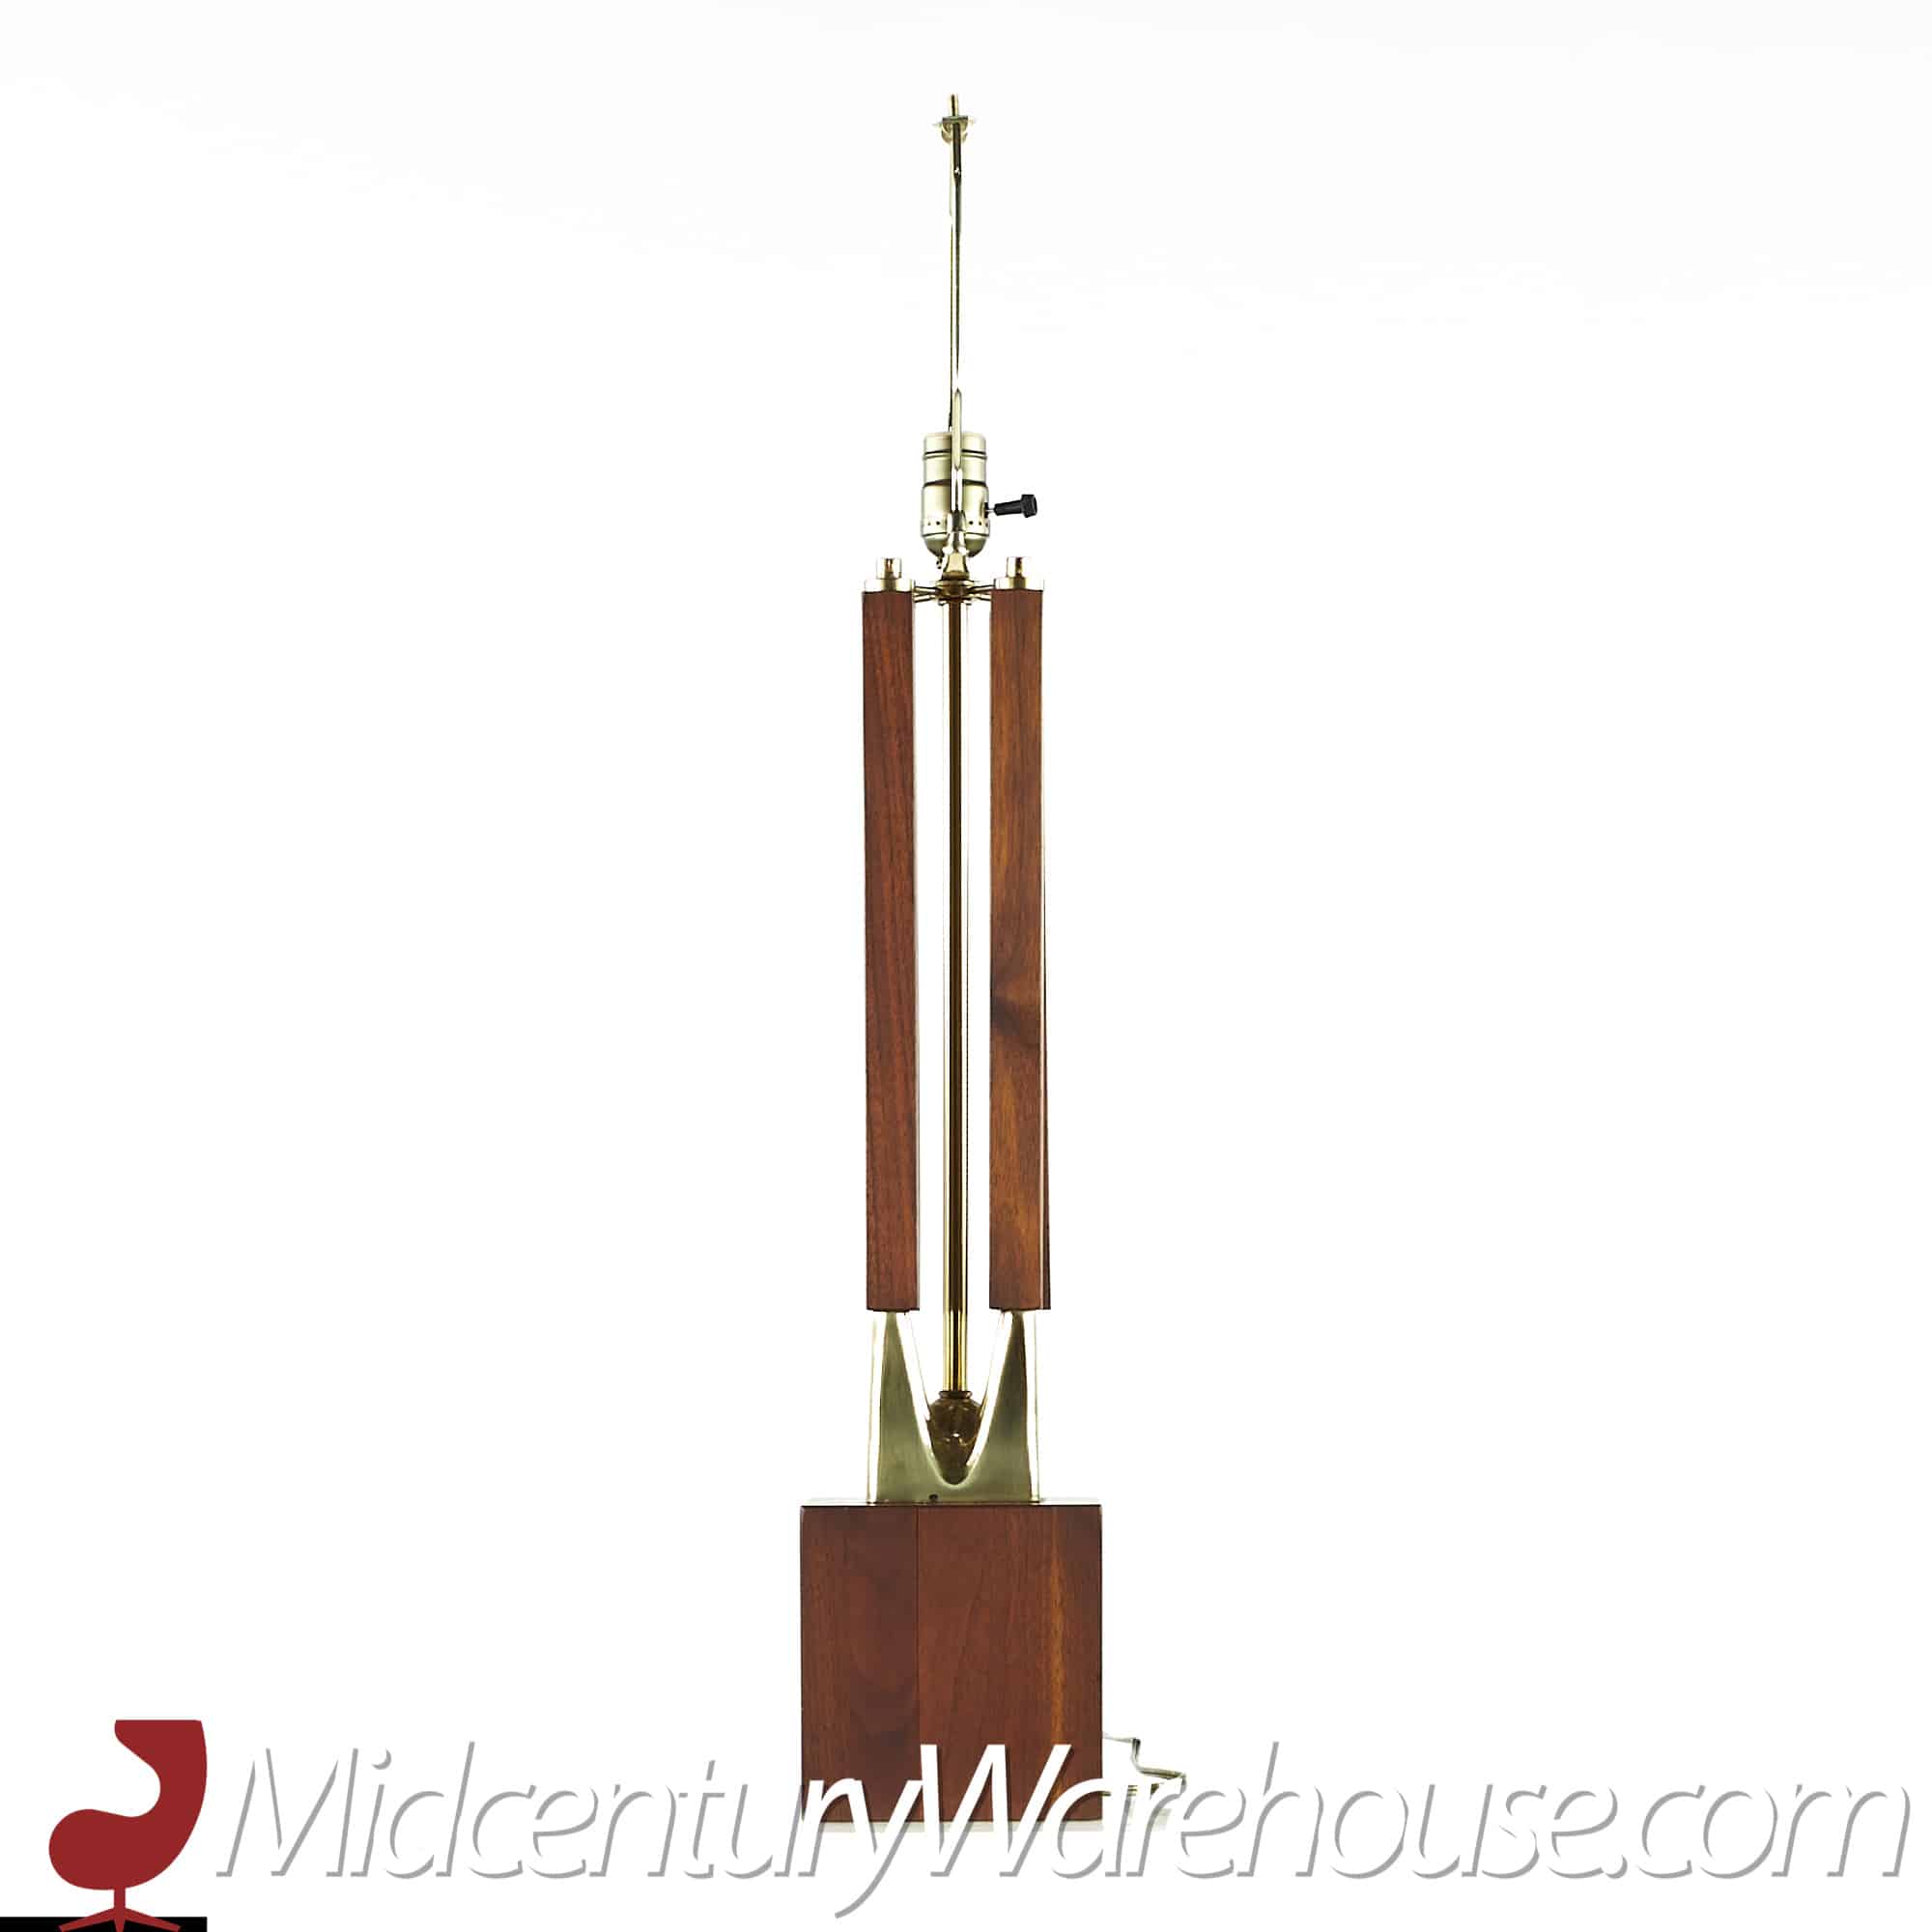 Laurel Mid Century Brass and Walnut Table Lamps - Pair